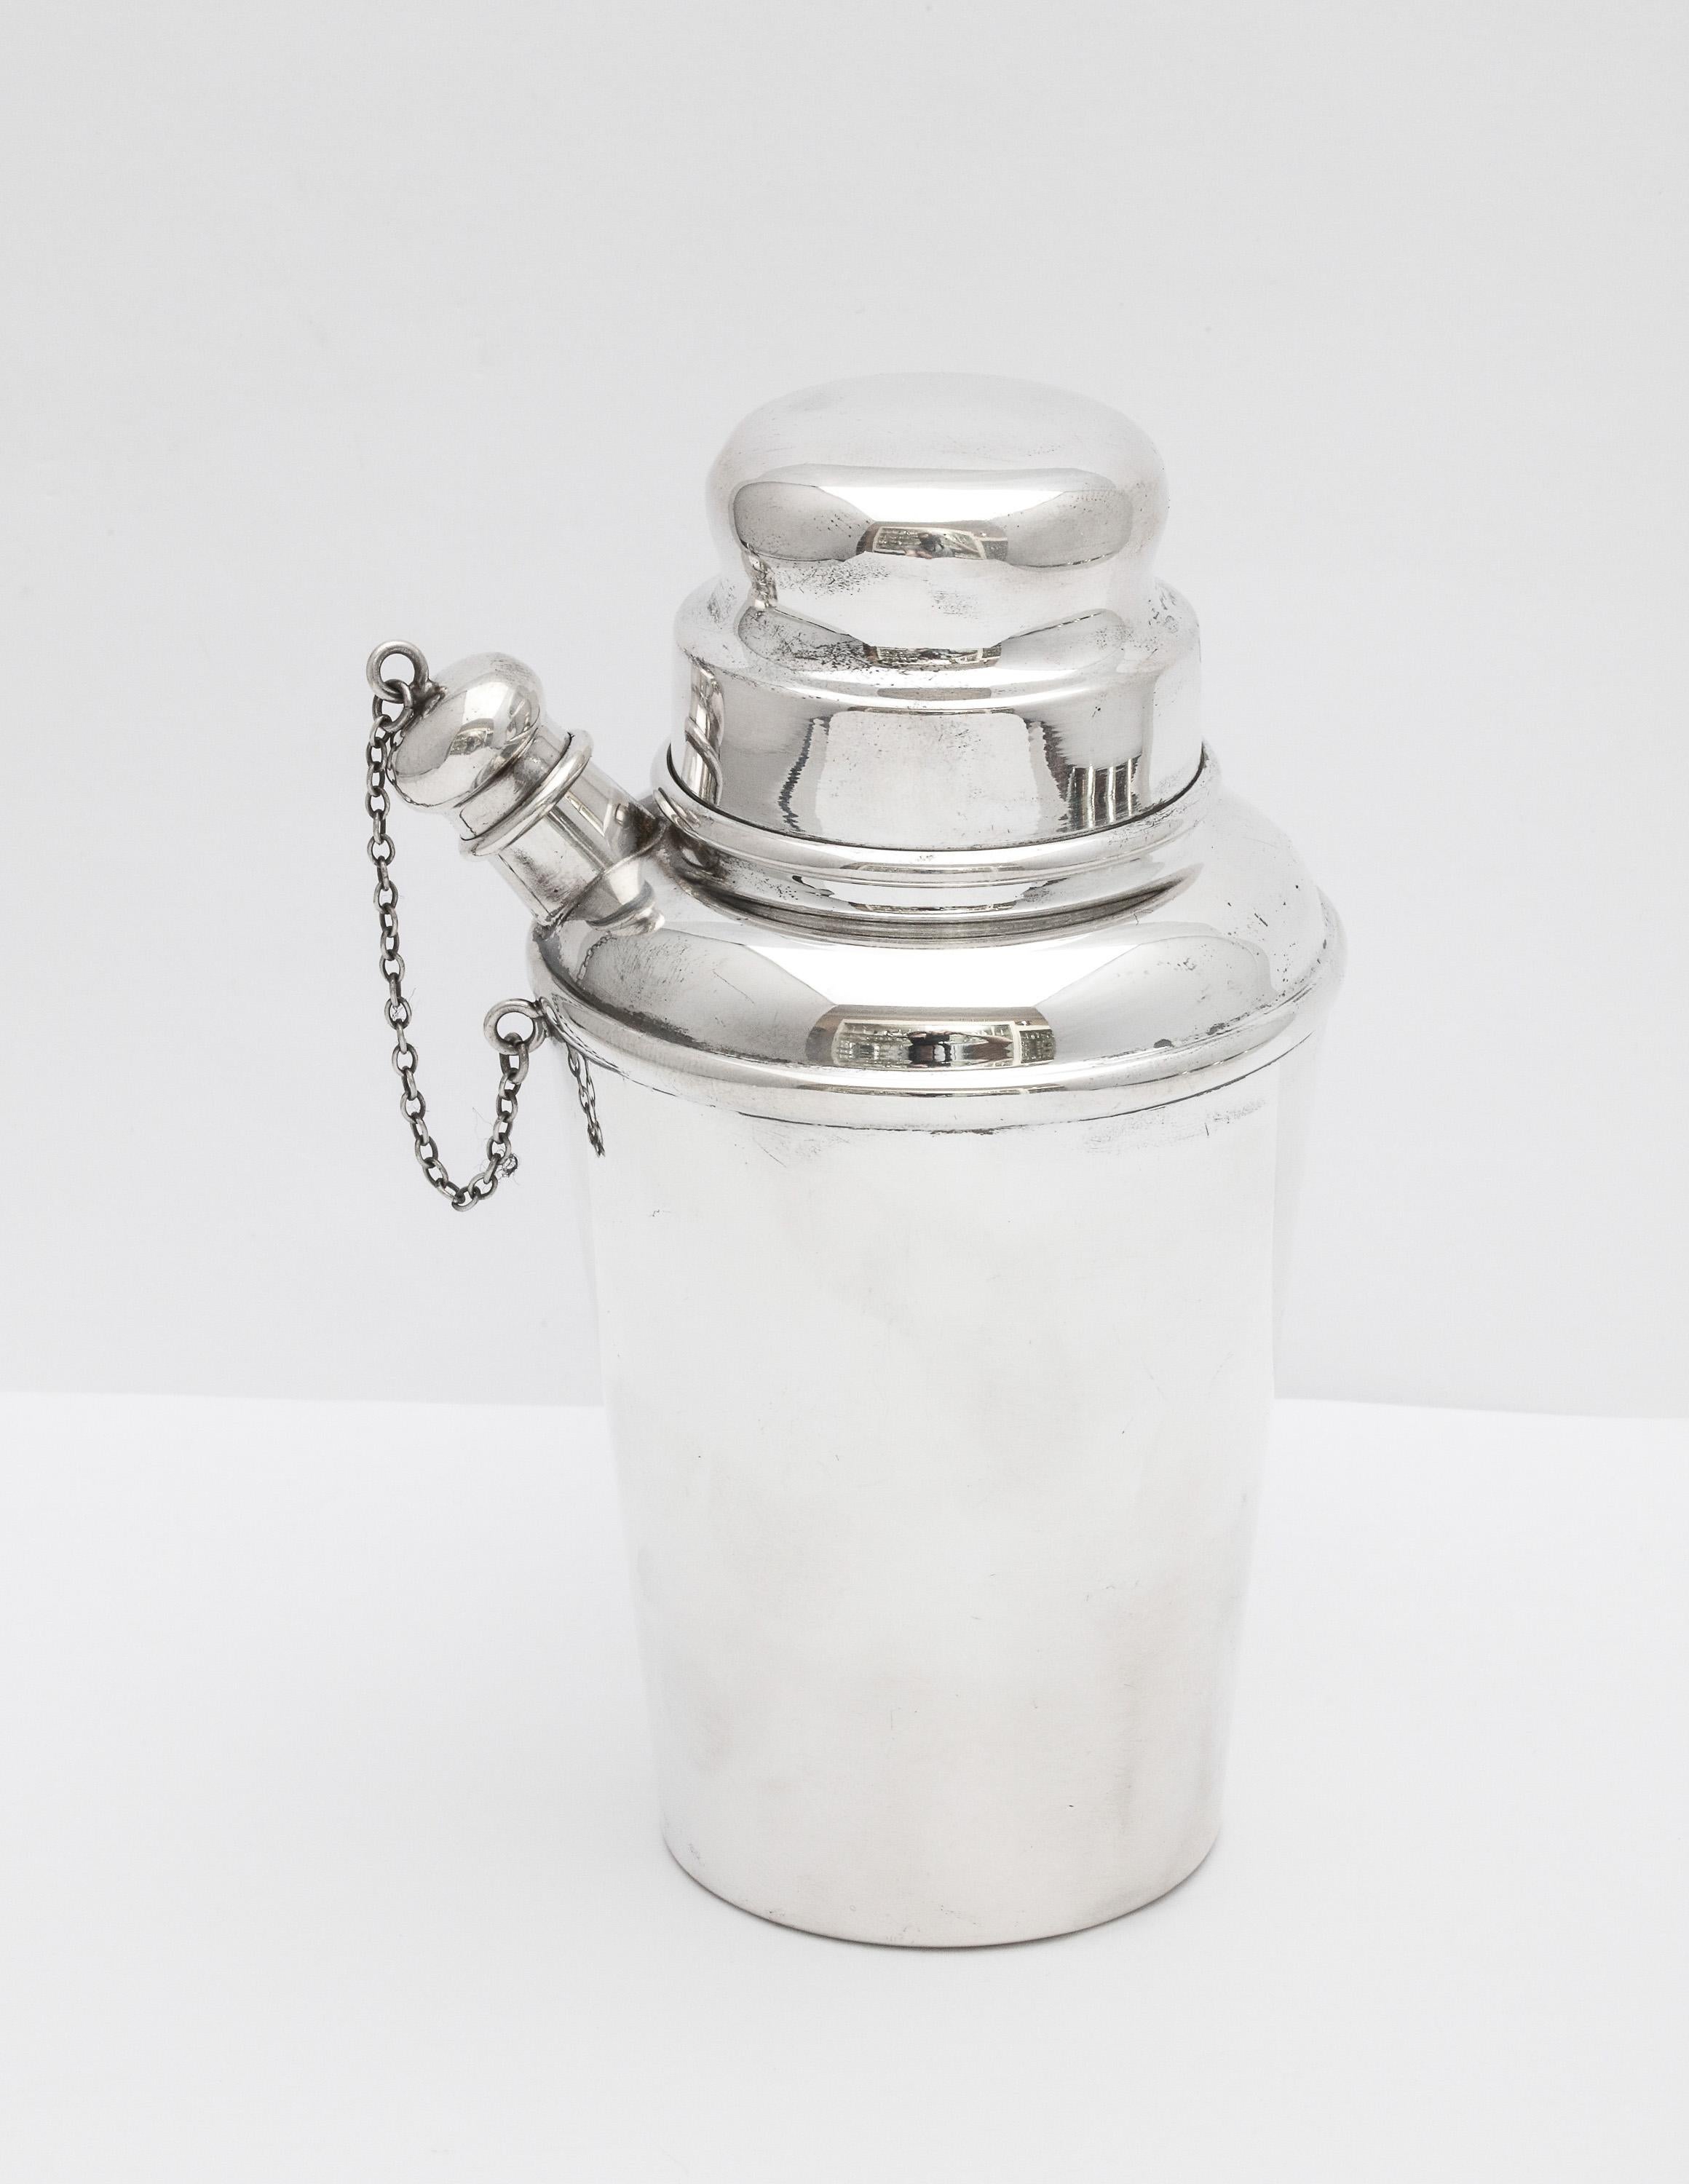 Art Deco, sterling silver cocktail shaker, New York, Ca. 1930's, Currier and Roby - makers. Measures: 5 3/4 inches high (at highest point) x 3 inches diameter at widest point x 2 1/4 inches diameter across base. Weighs 4.875 troy ounces. Has some